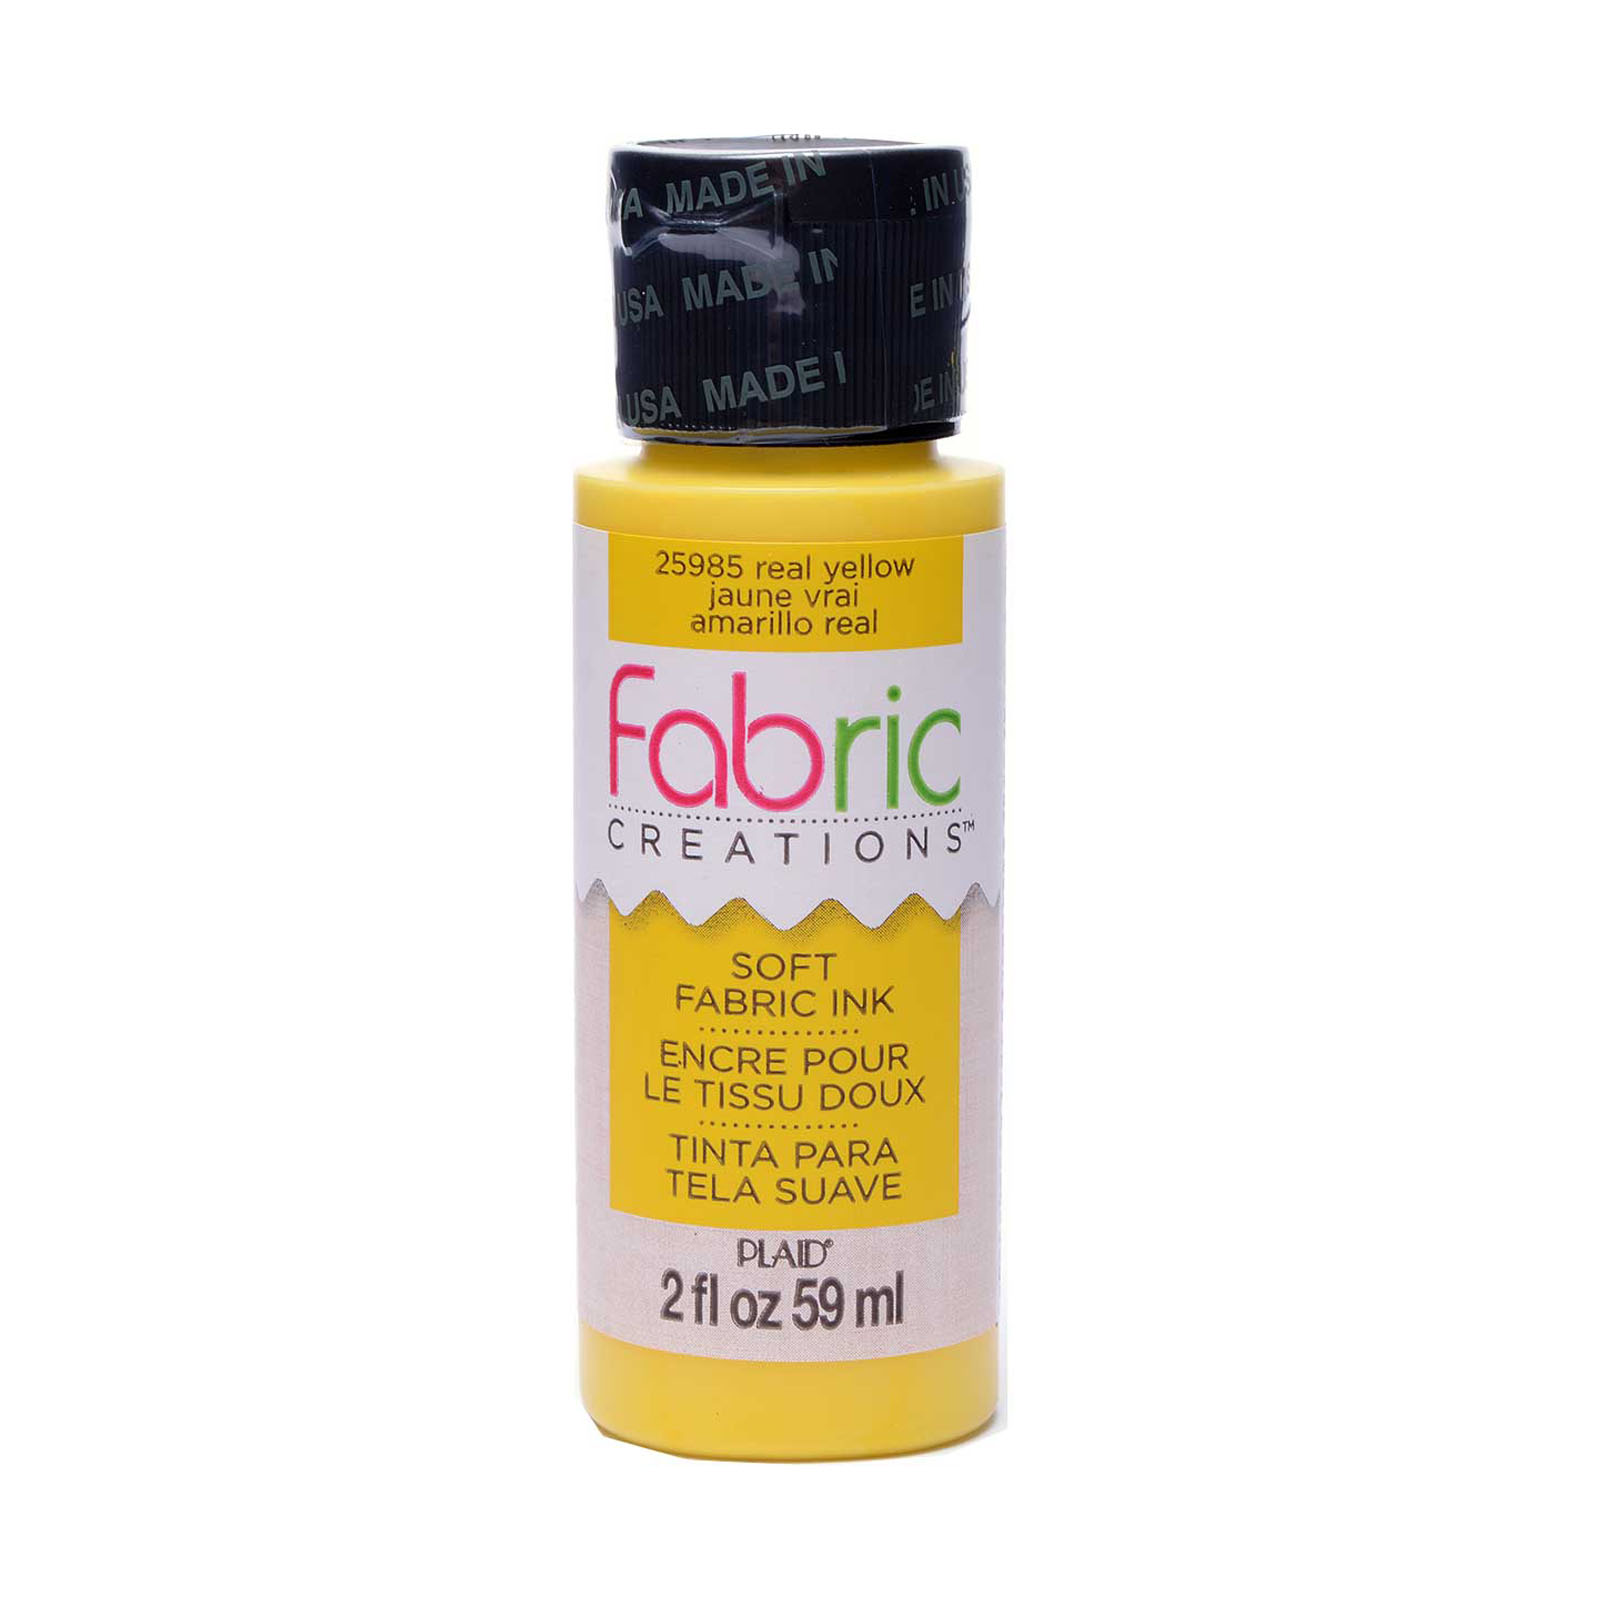 Fabric Creations • Soft fabric inkt 59ml Real yellow